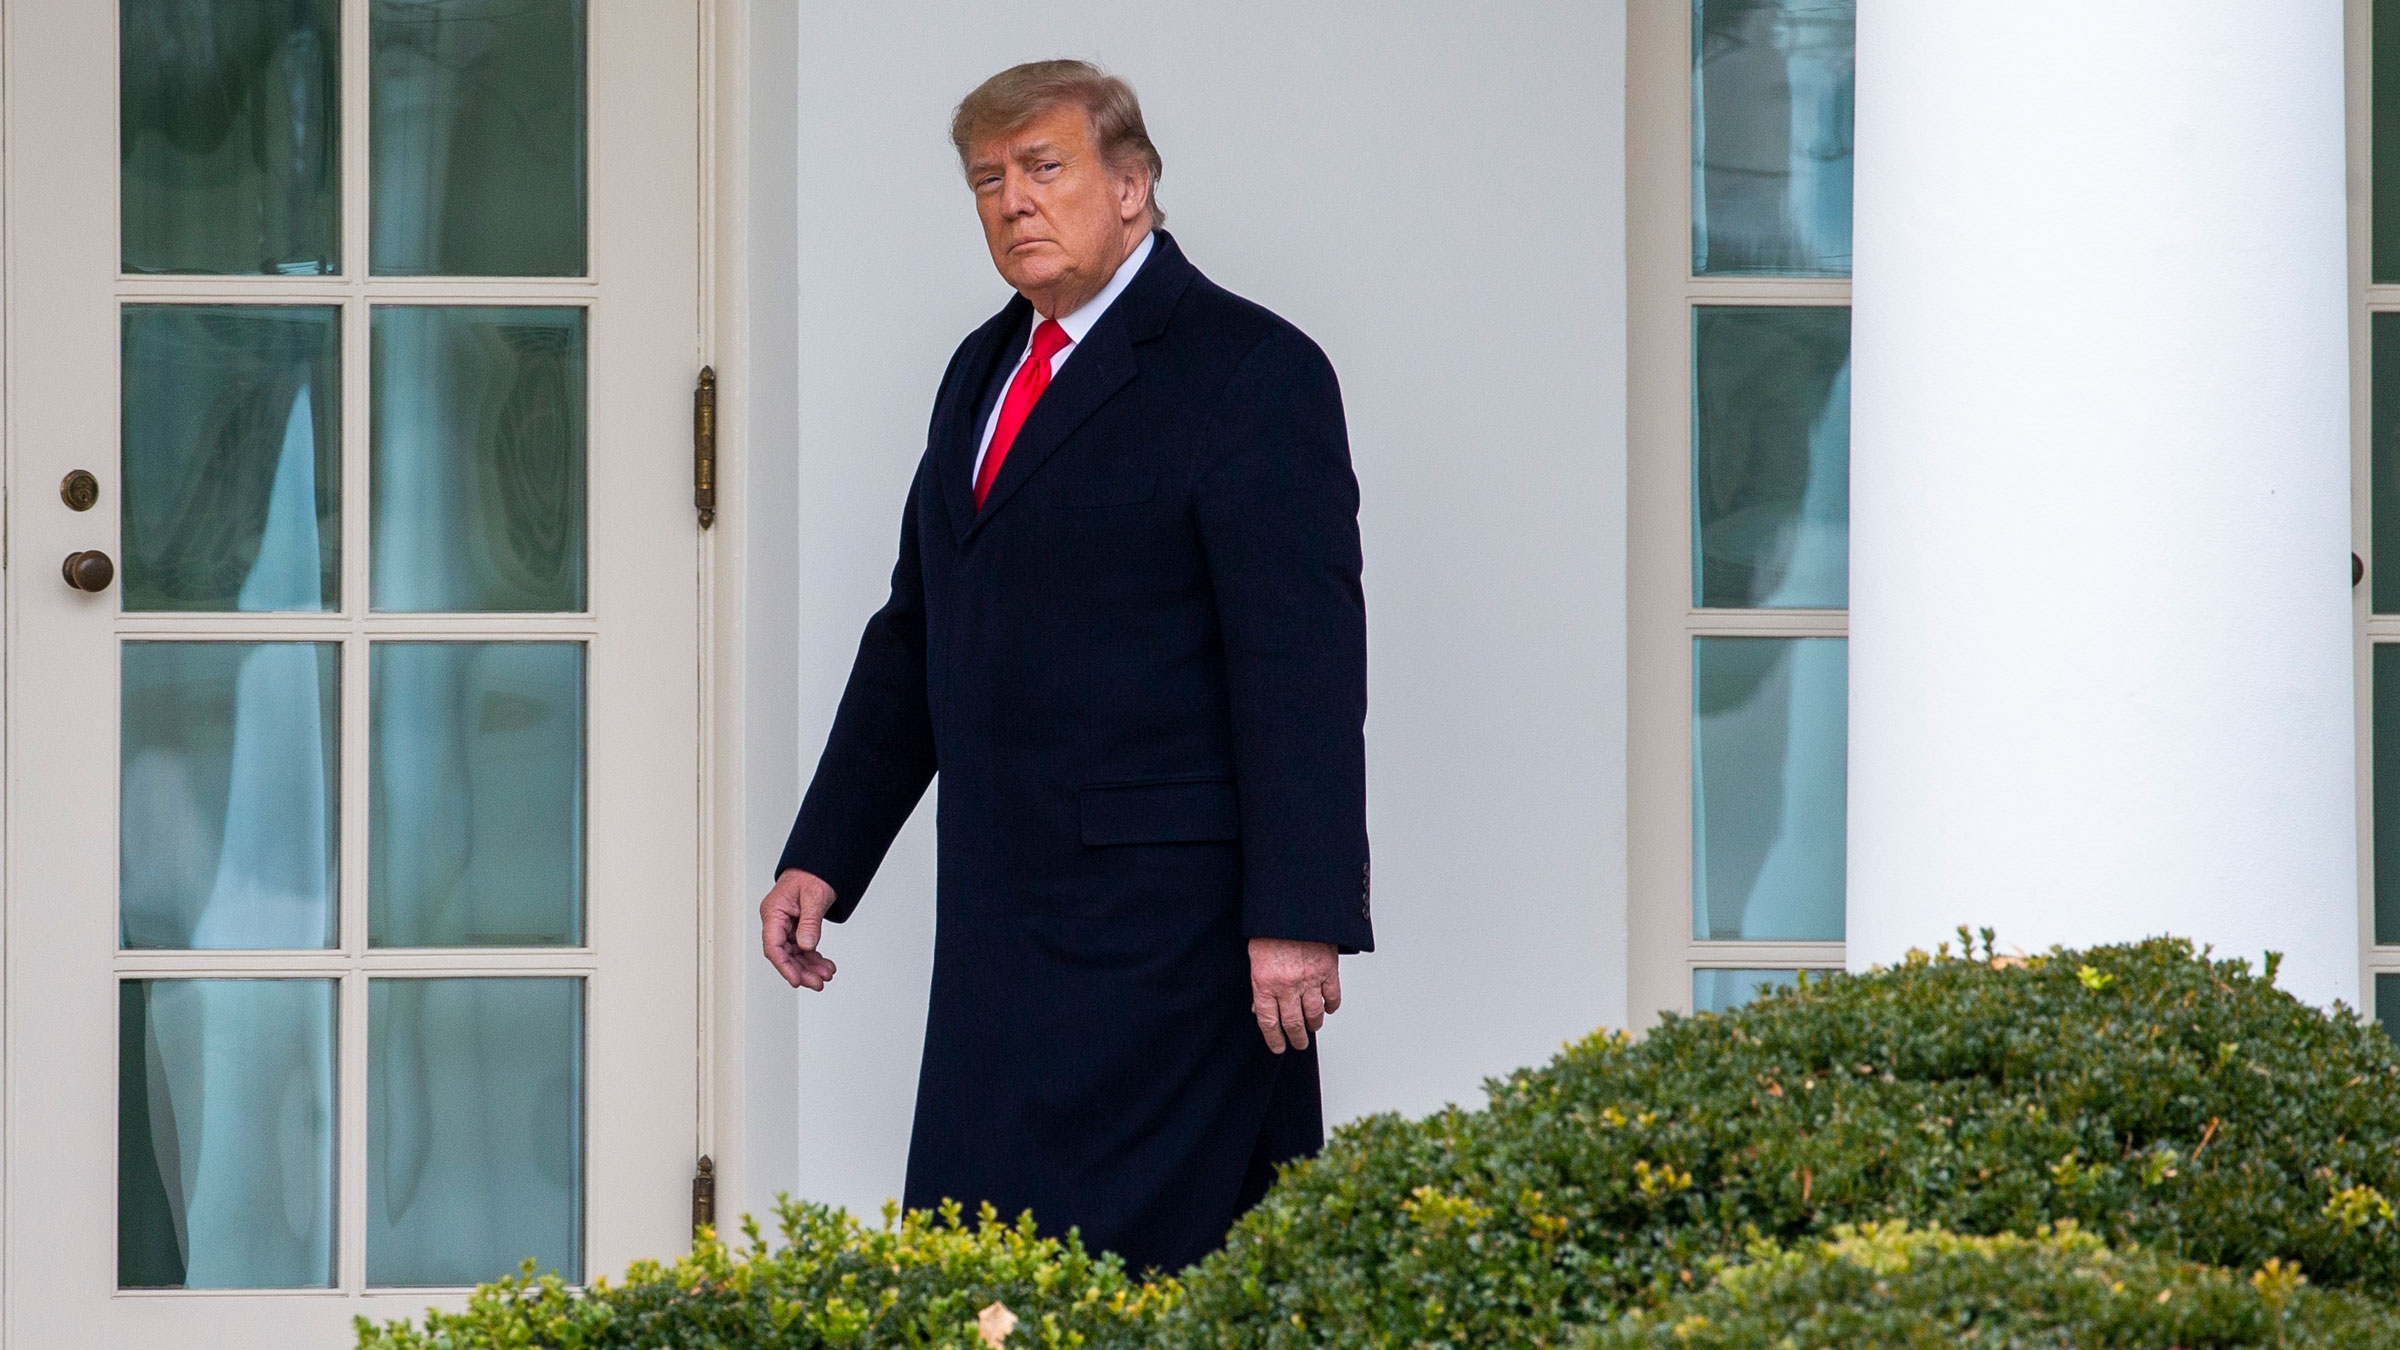 Then-President Donald Trump walks to the Oval Office in December 2020.